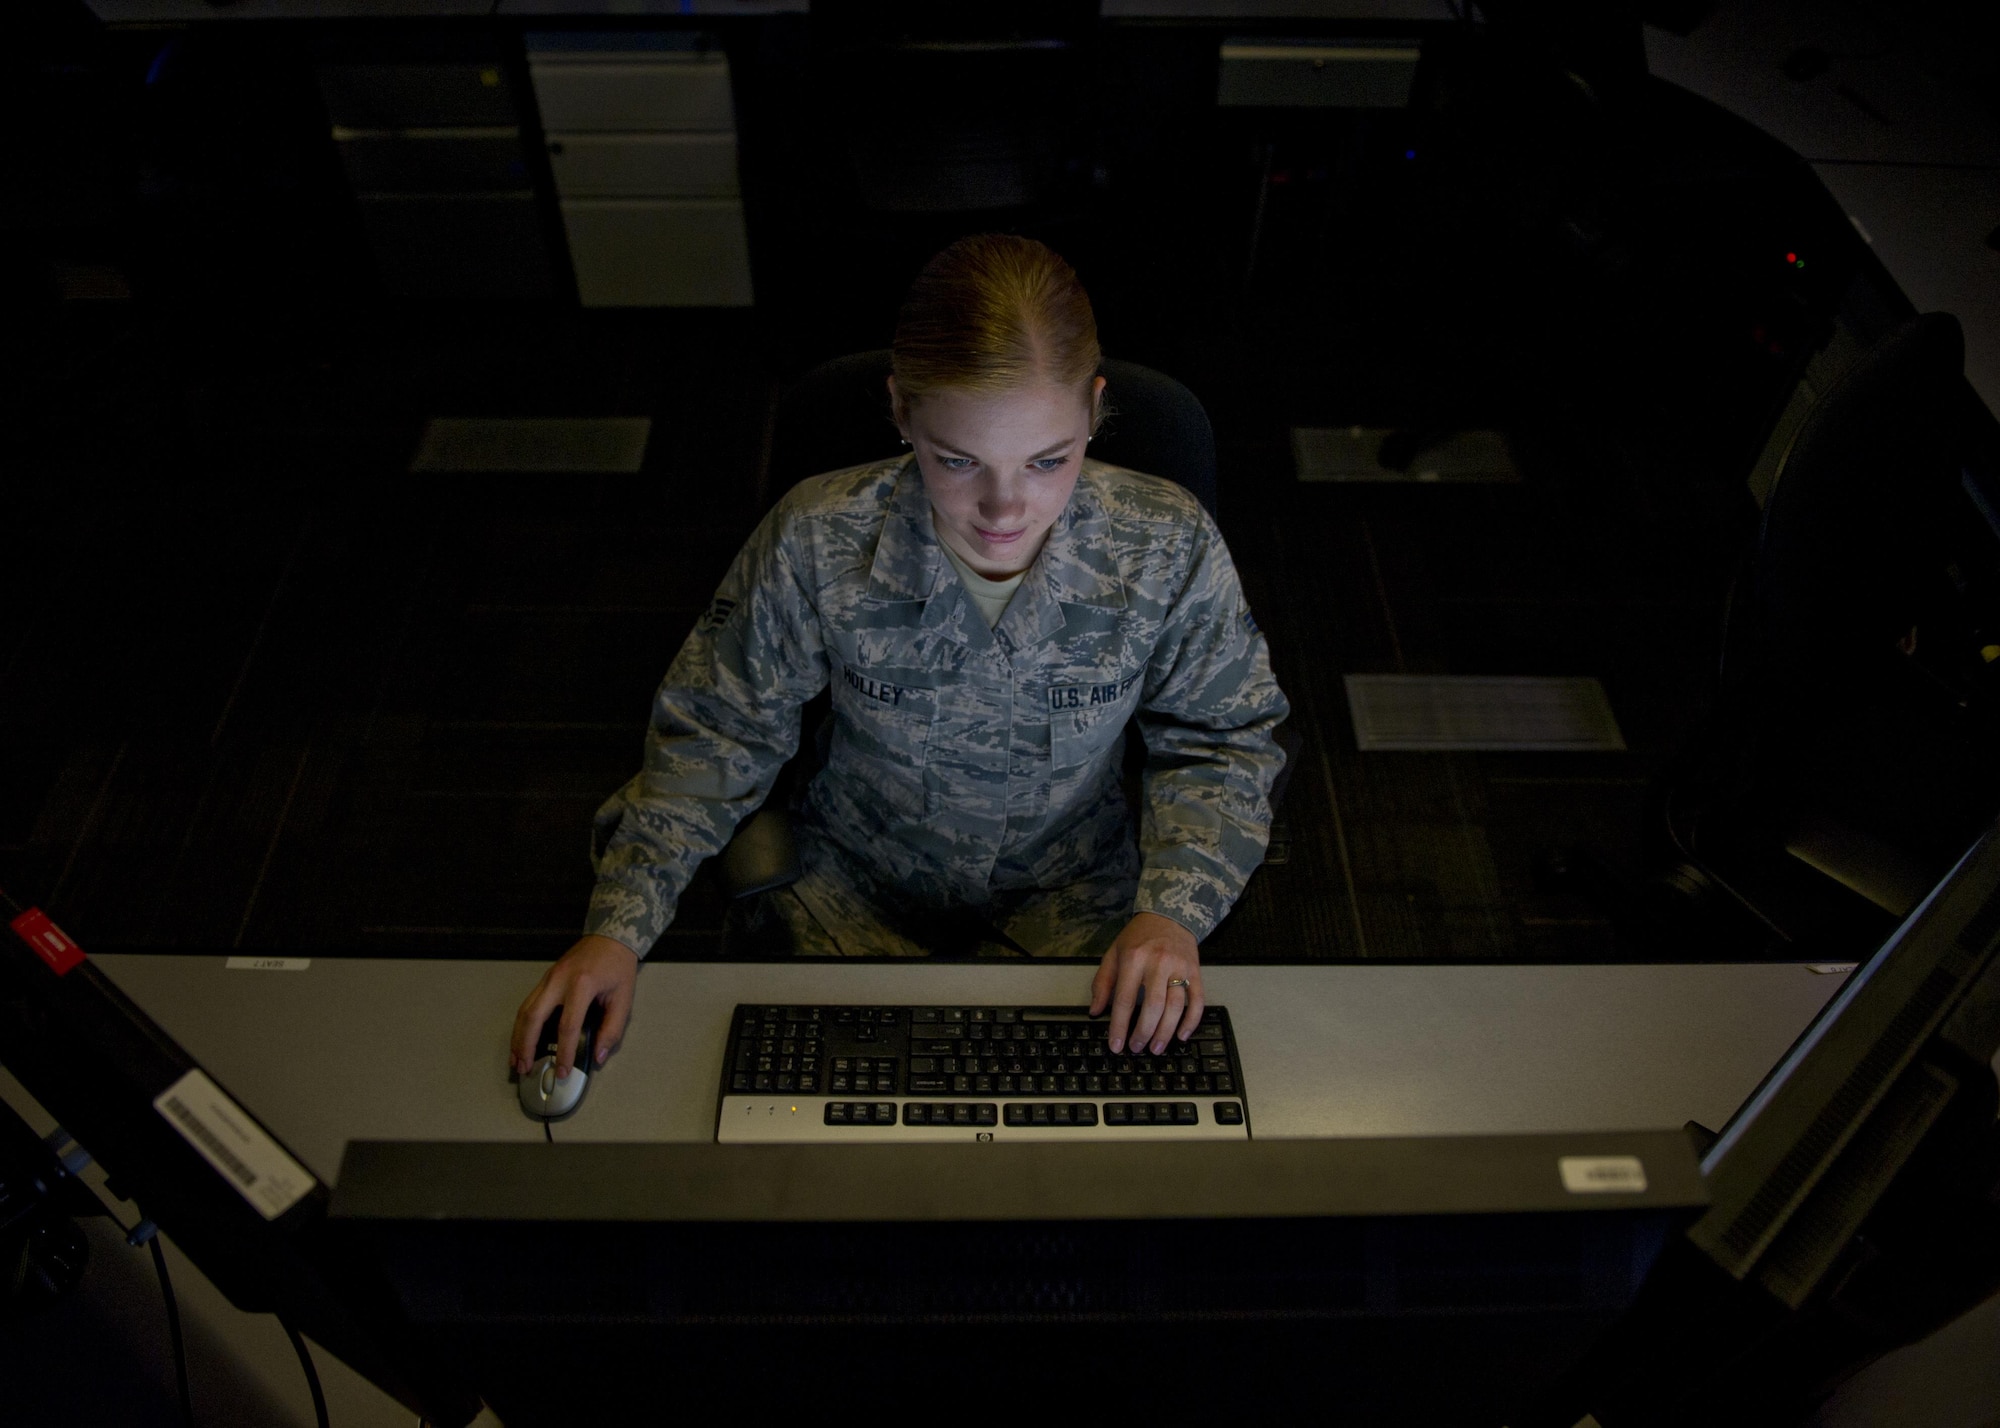 Senior Airman Meaghan Holley conducts mission operations June 30, 2015. Holley was named one of the 12 Outstanding Airmen of the Year in an announcement from the Air Force Personnel Center Monday, July 27, 2015. (U.S. Air Force photo by Senior Airman Justyn M. Freeman)